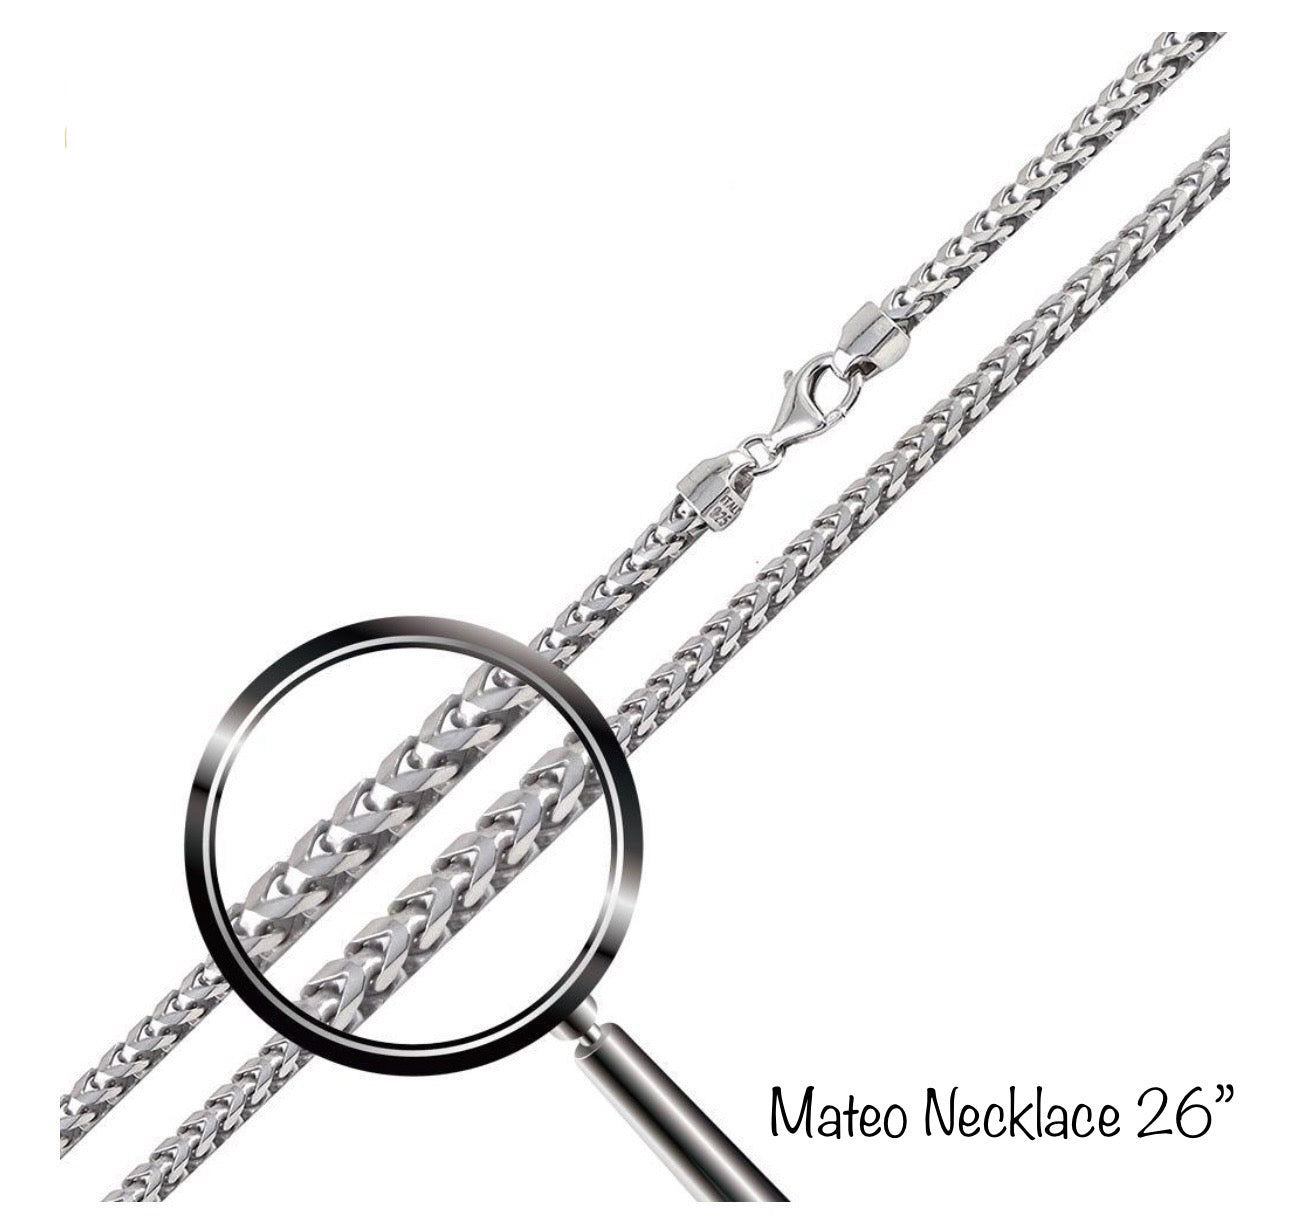 Mateo Necklace 26"